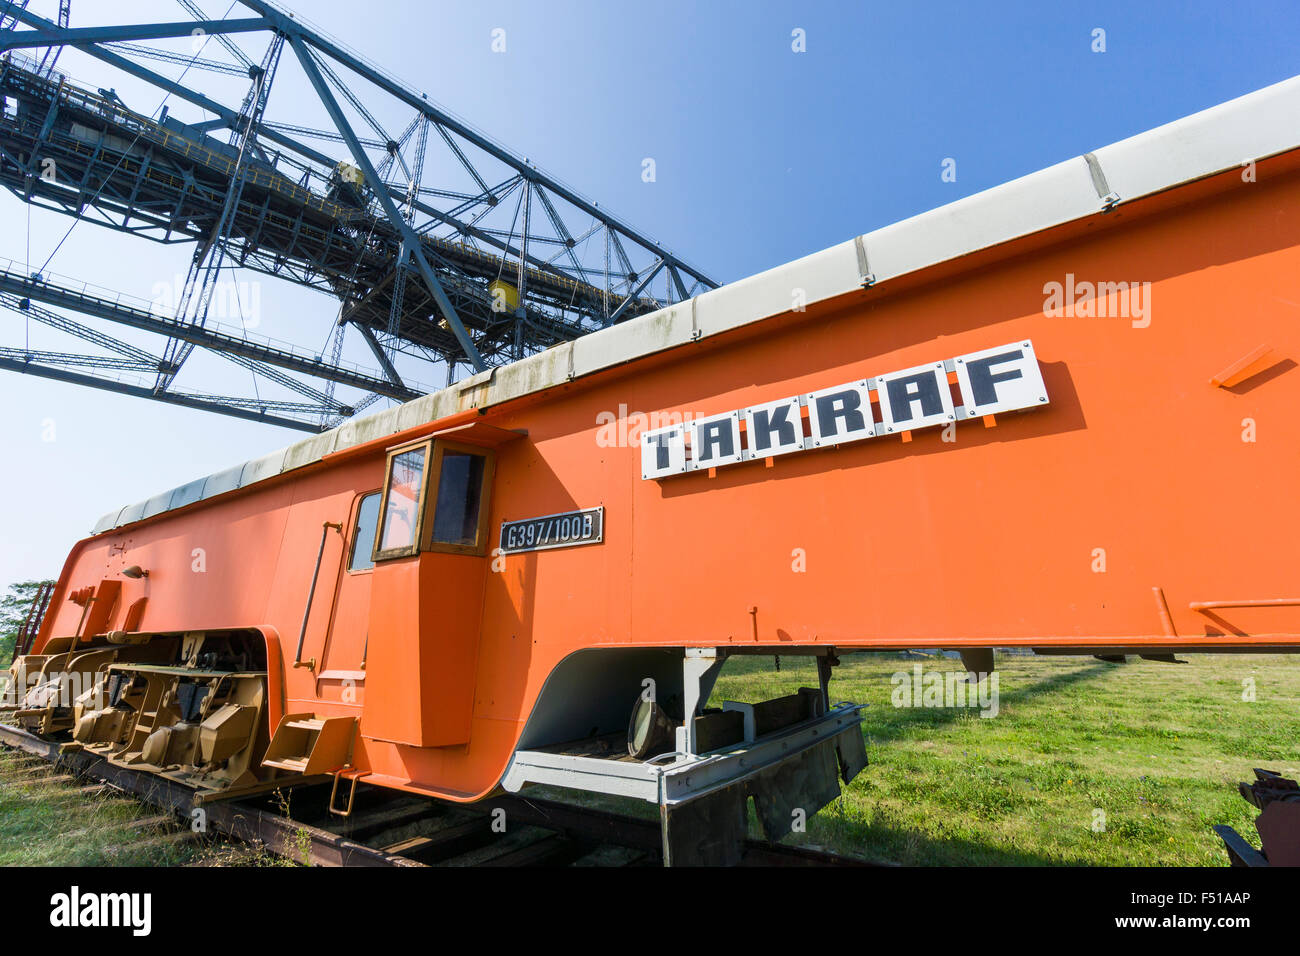 An orange Track Moving Machine of the company Takraf, used in brown coal opencast mining to shift railway tracks, a part of the Stock Photo